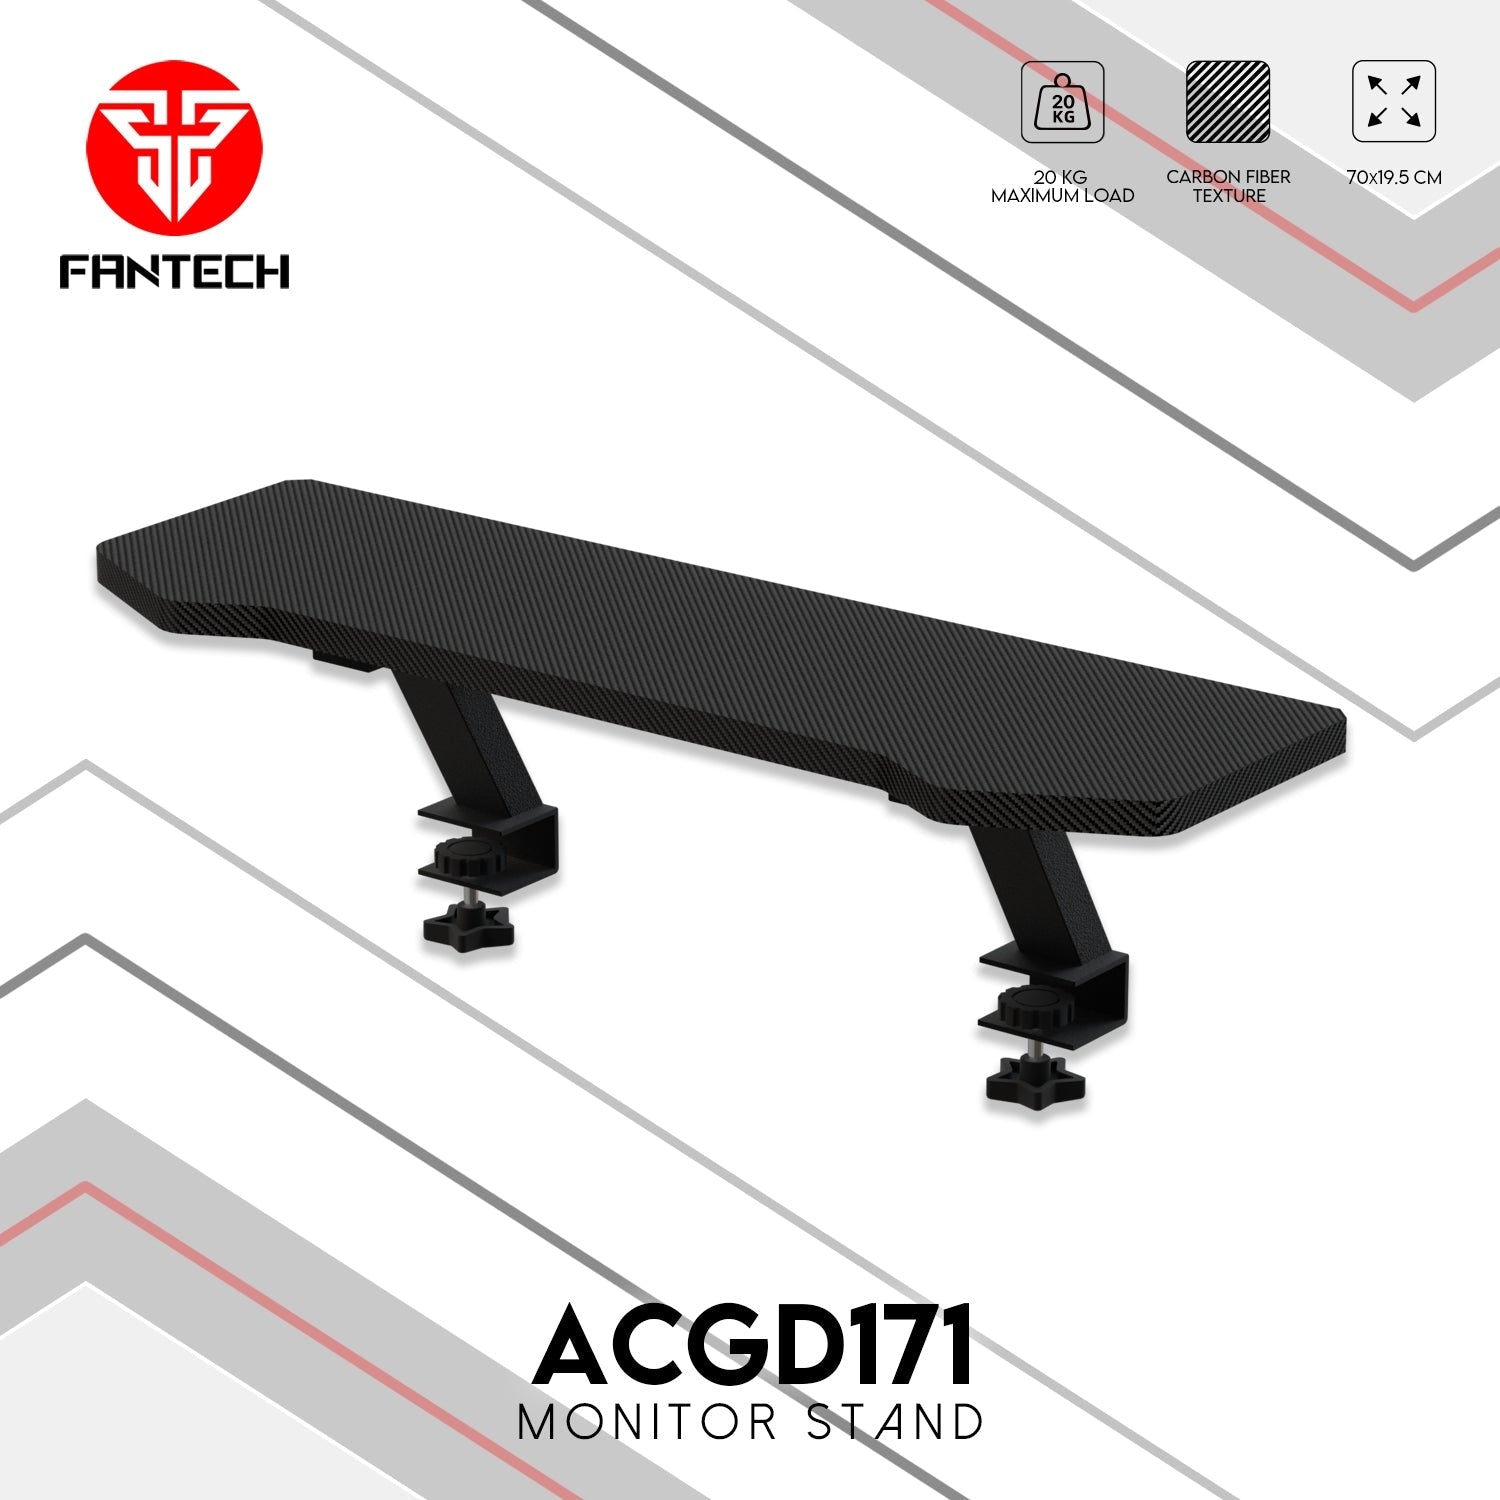 Fantech ACGD171 Monitor Stand Premium Material and Maximized Desk Space Tower